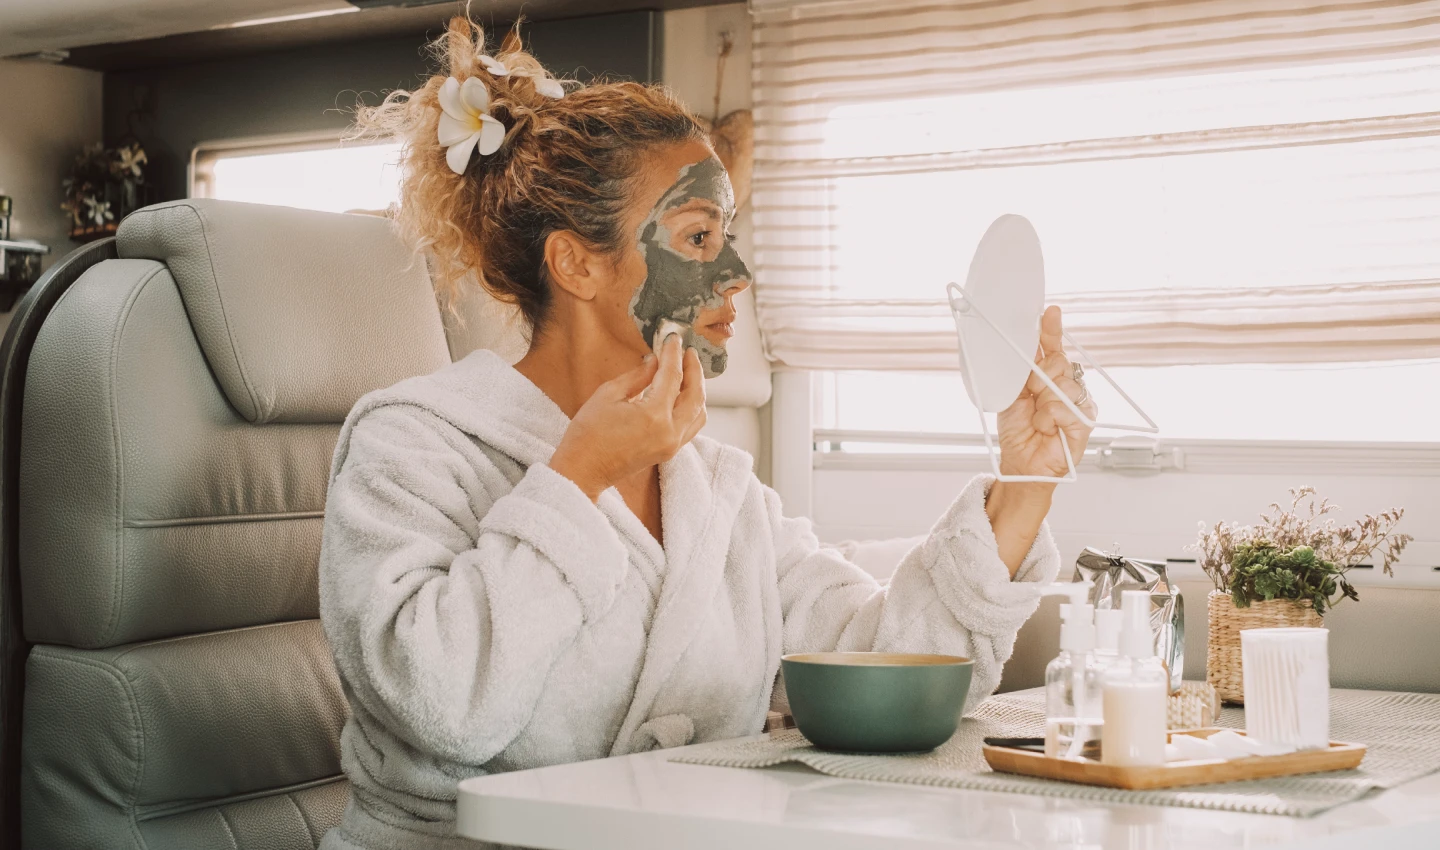 Woman applying DIY scrub made with natural ingredients like sugar and coconut oil to her face, a great way to achieve glowing skin at home.